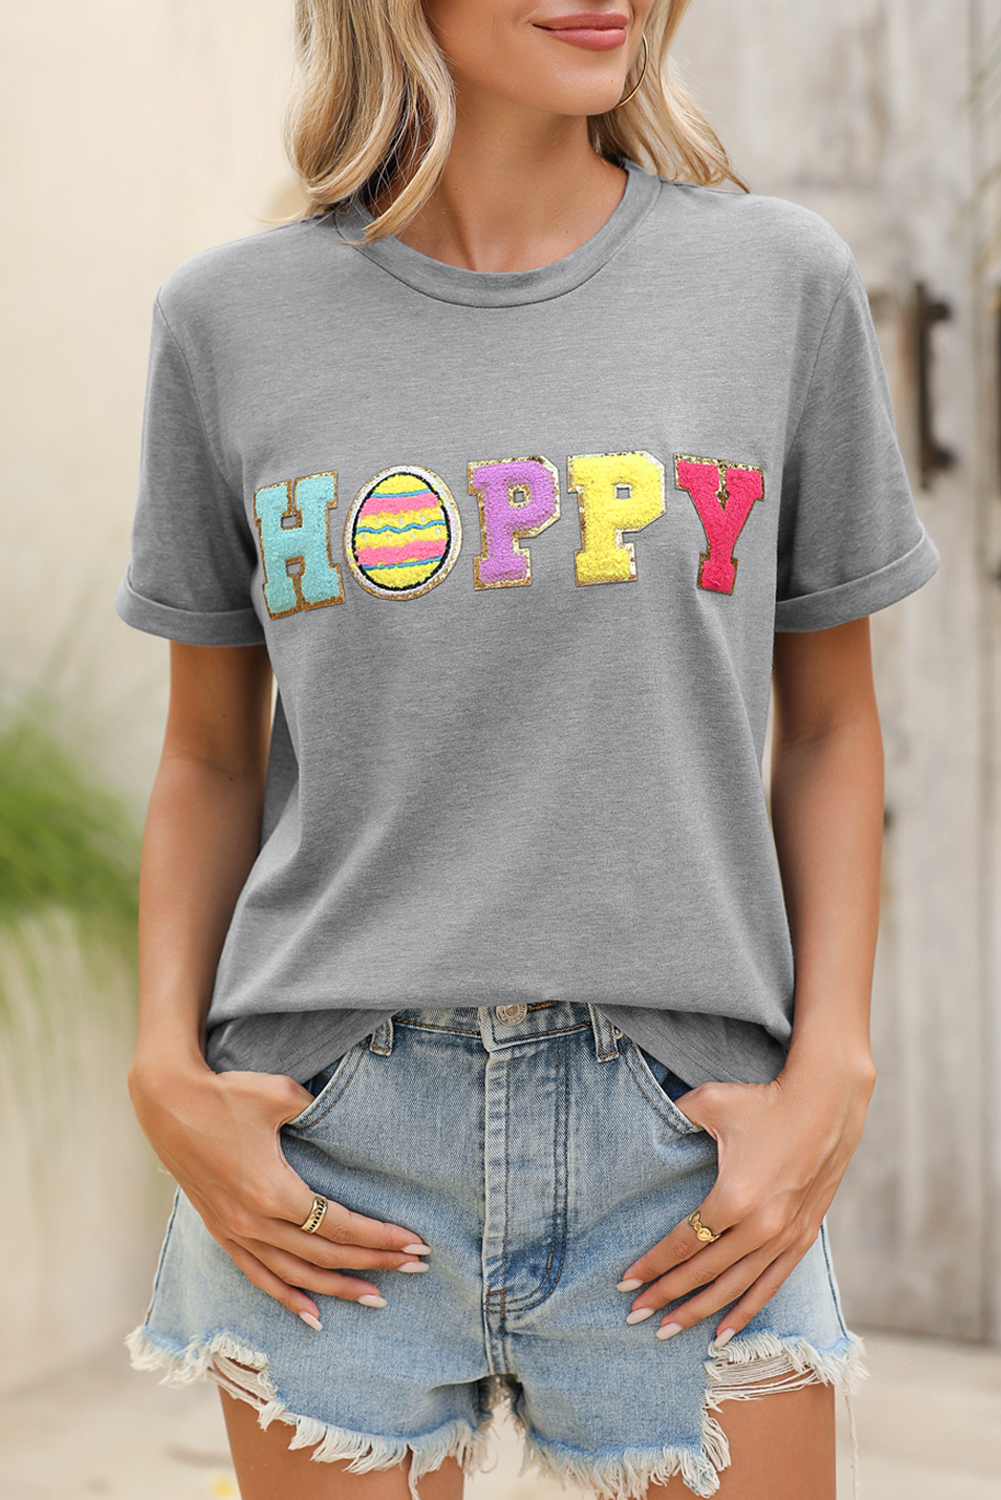 Shewin Wholesale New arrival Gray Easter Egg HAPPY Chenille Letter Graphic T SHIRT